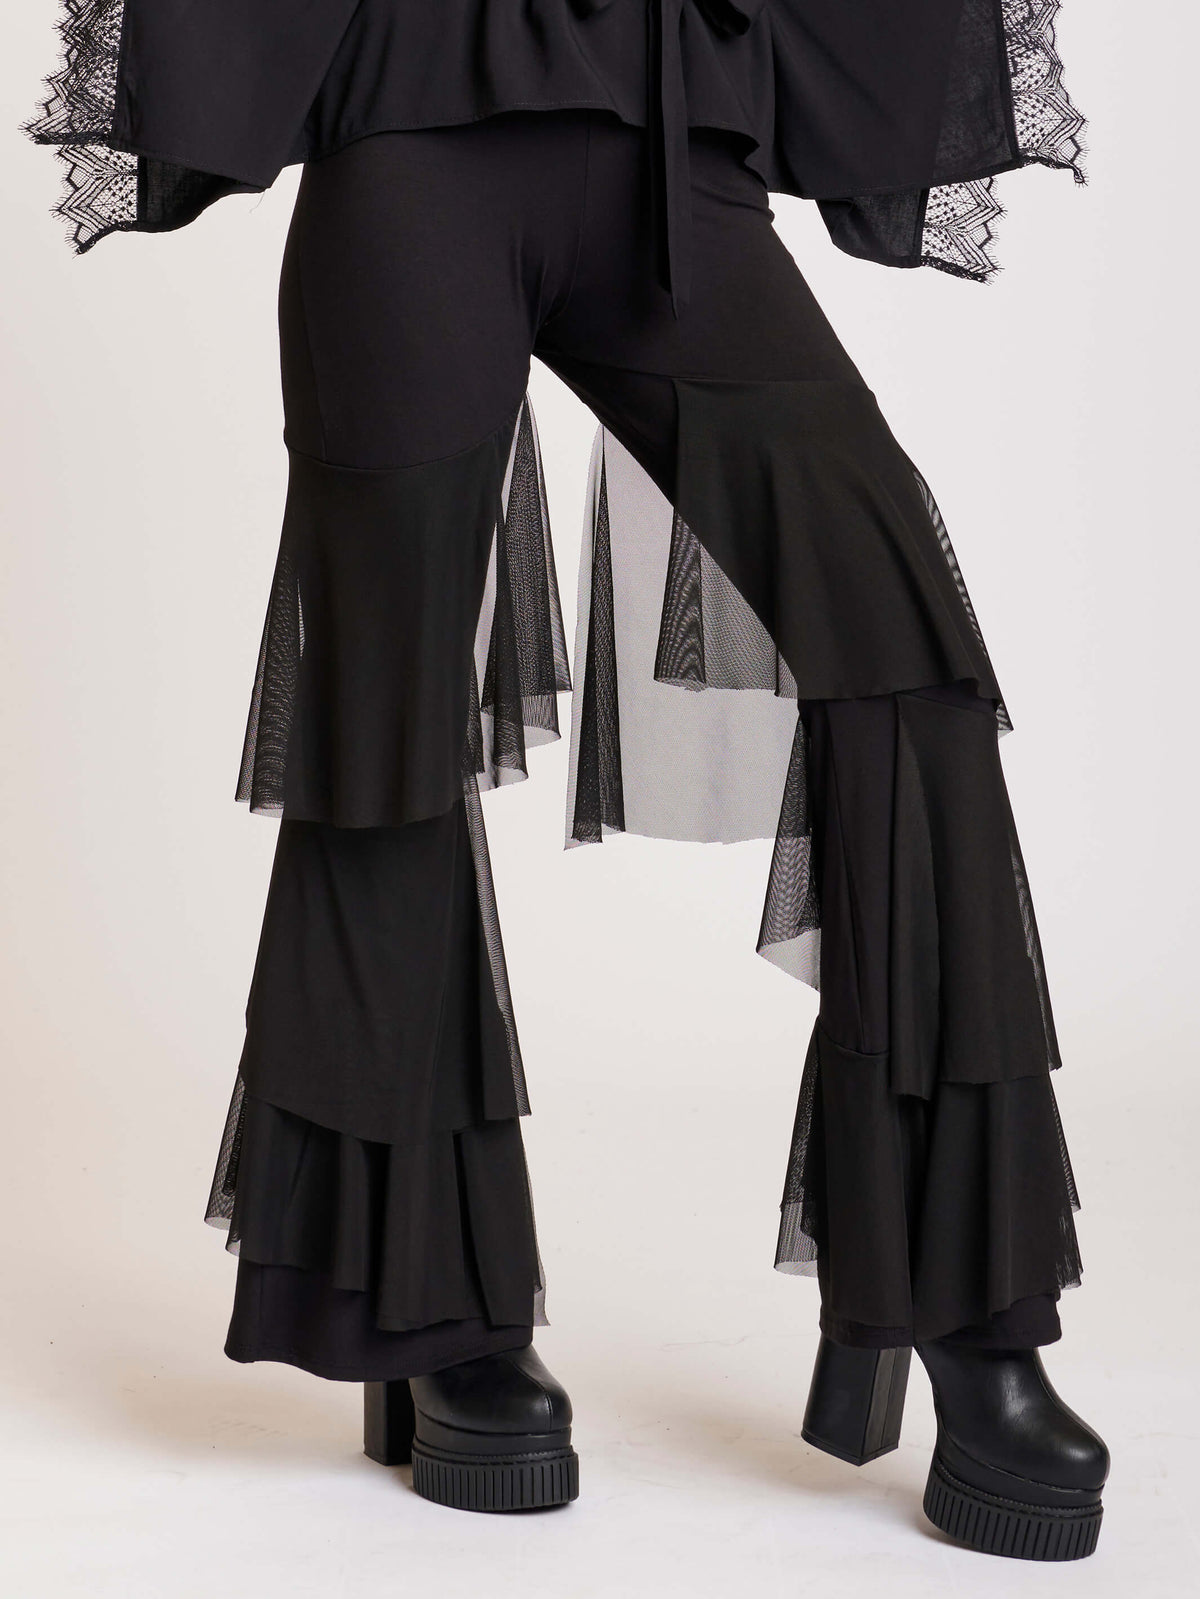 Palazzo pants with mesh panel layers from mid thigh down